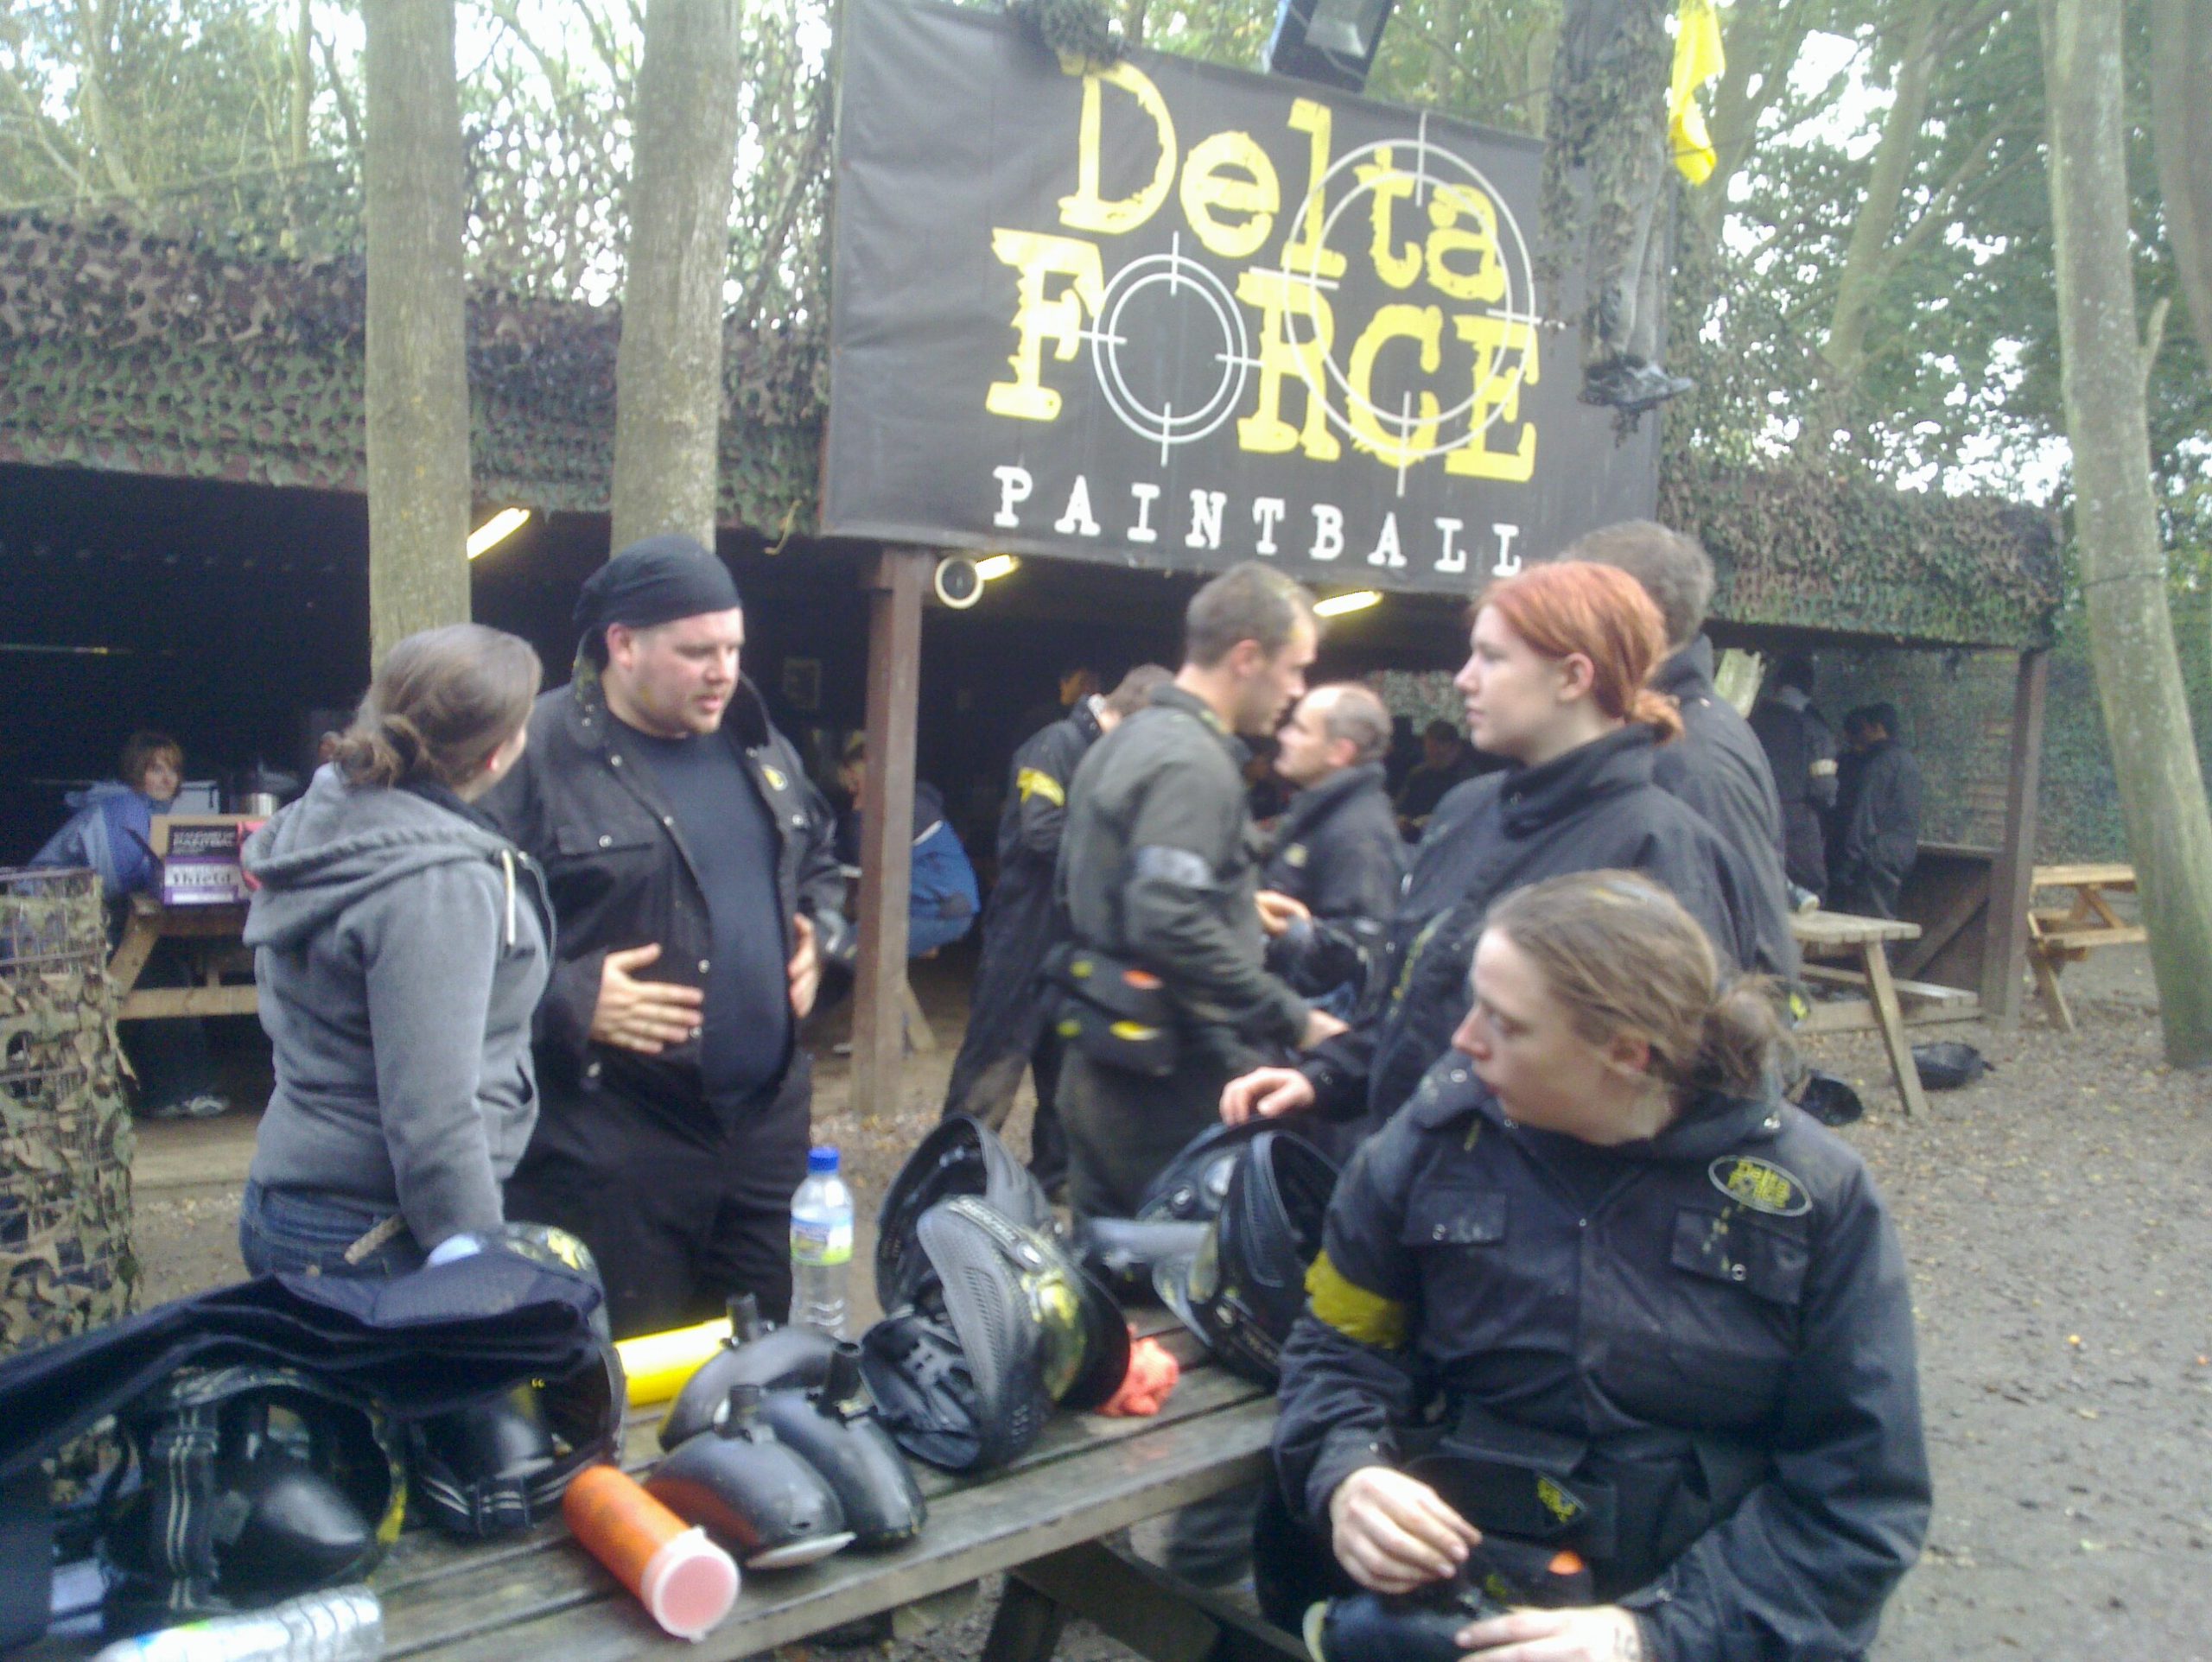 Party people planning paintball play preparations.